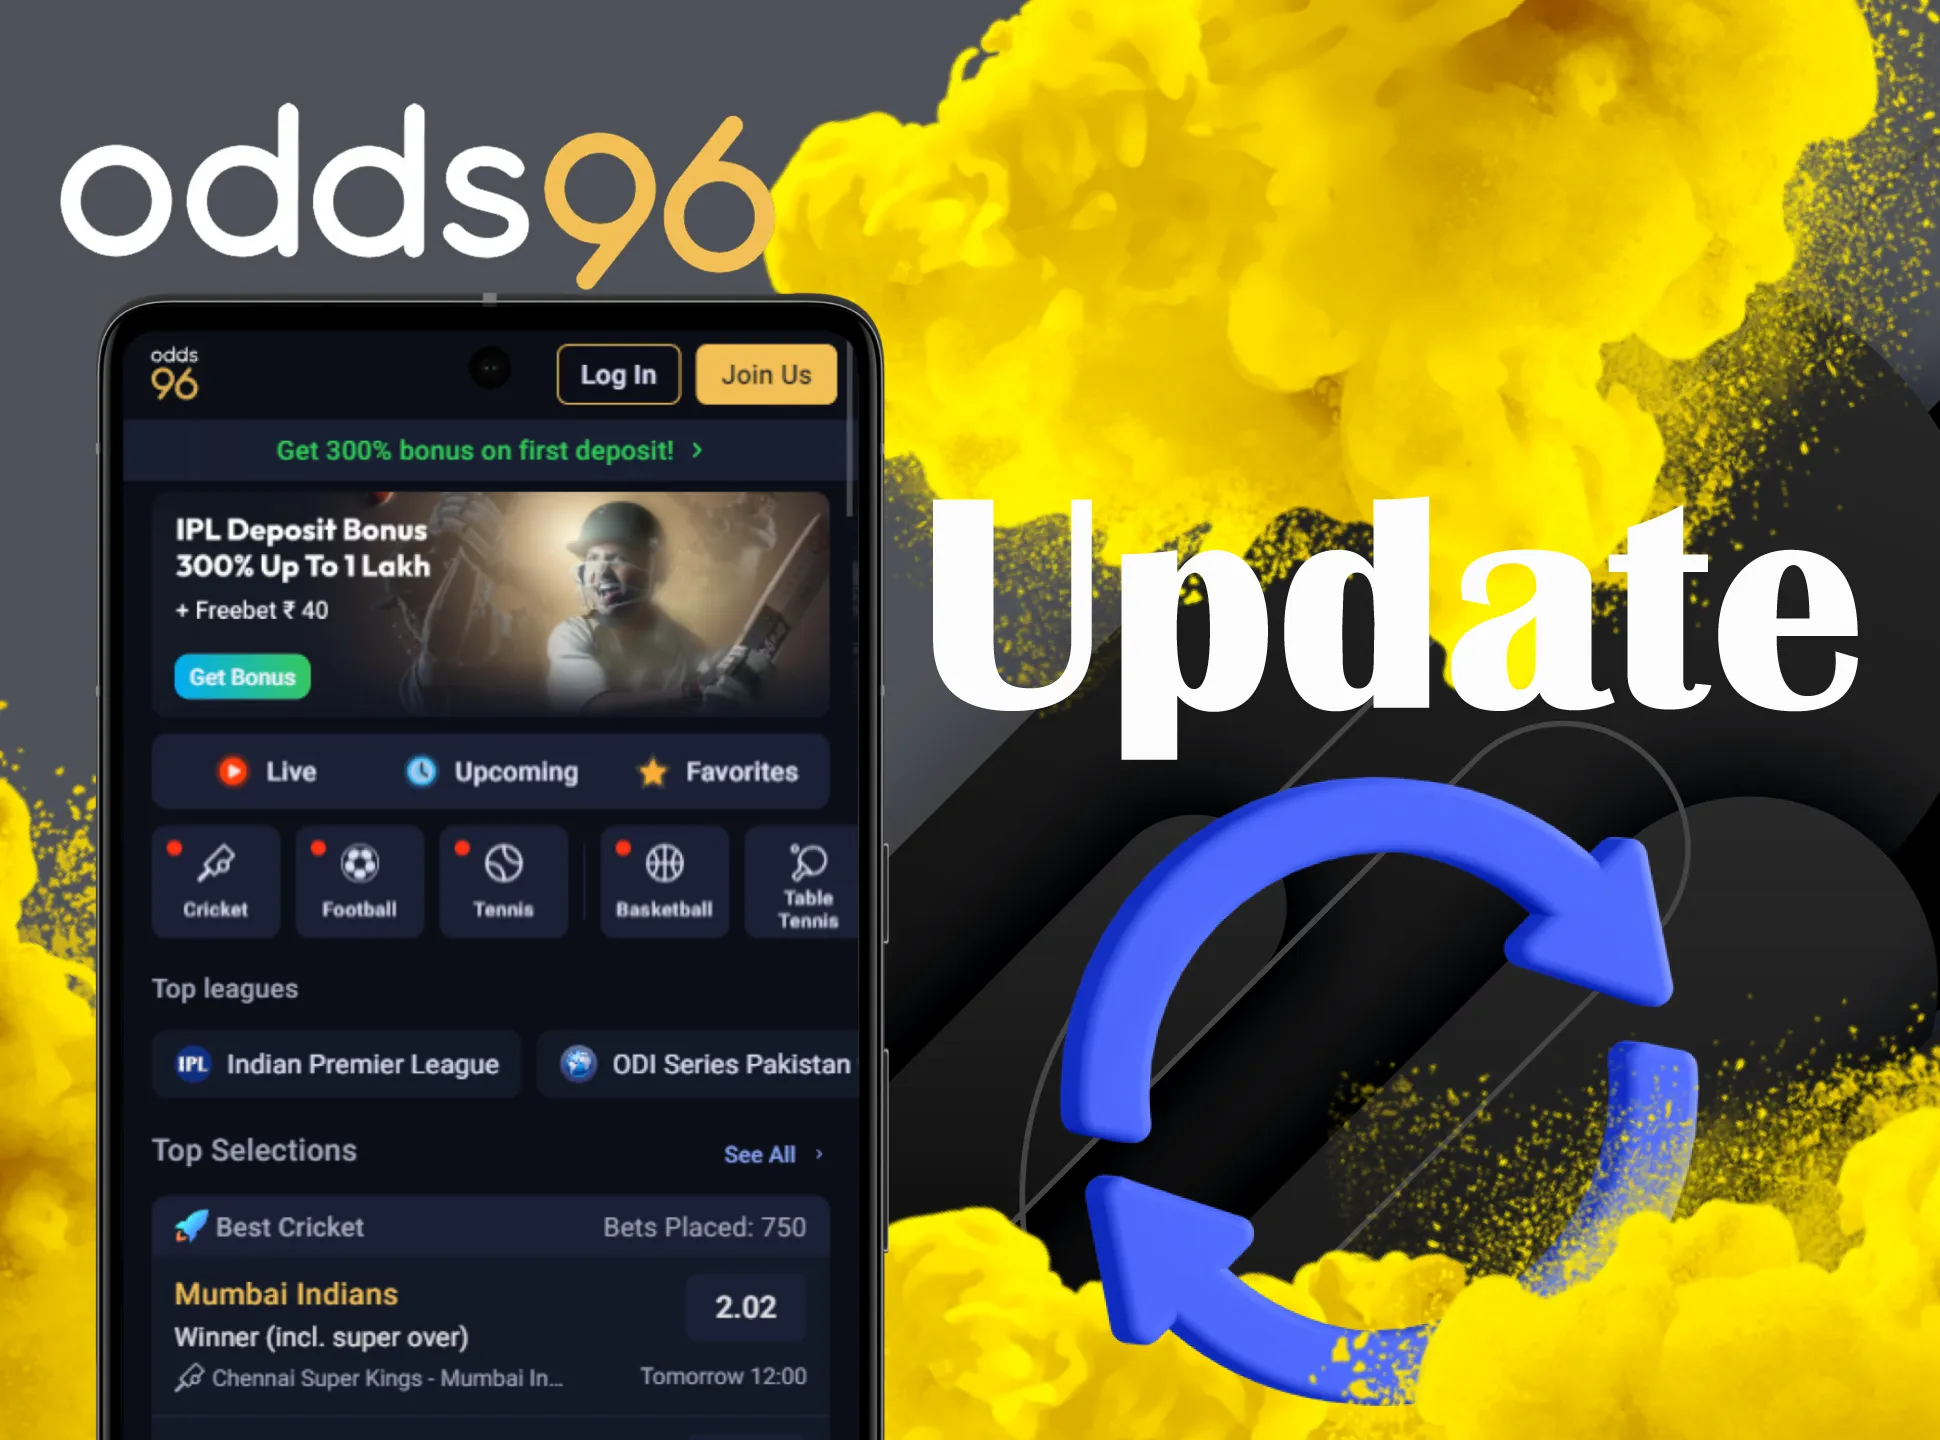 Odds96 app updates automatically after you logging in.